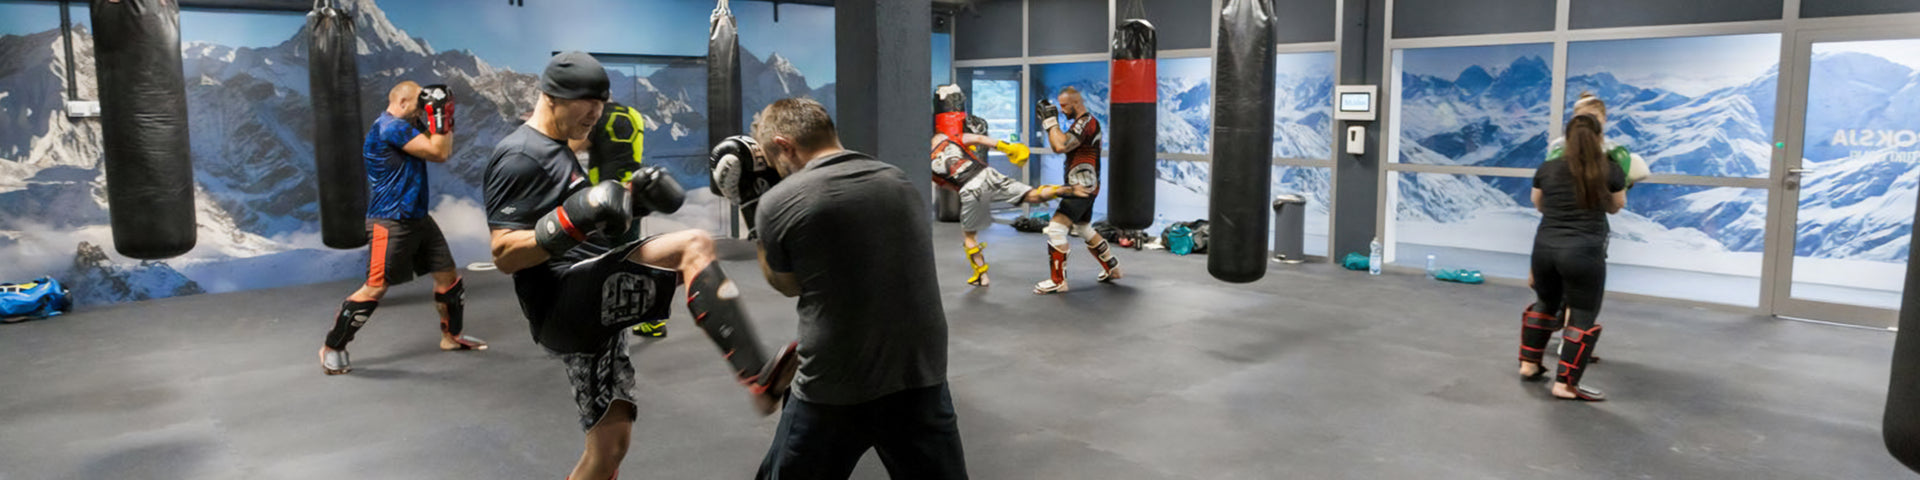 Multiple people practicing kickboxing in massive altitude chamber